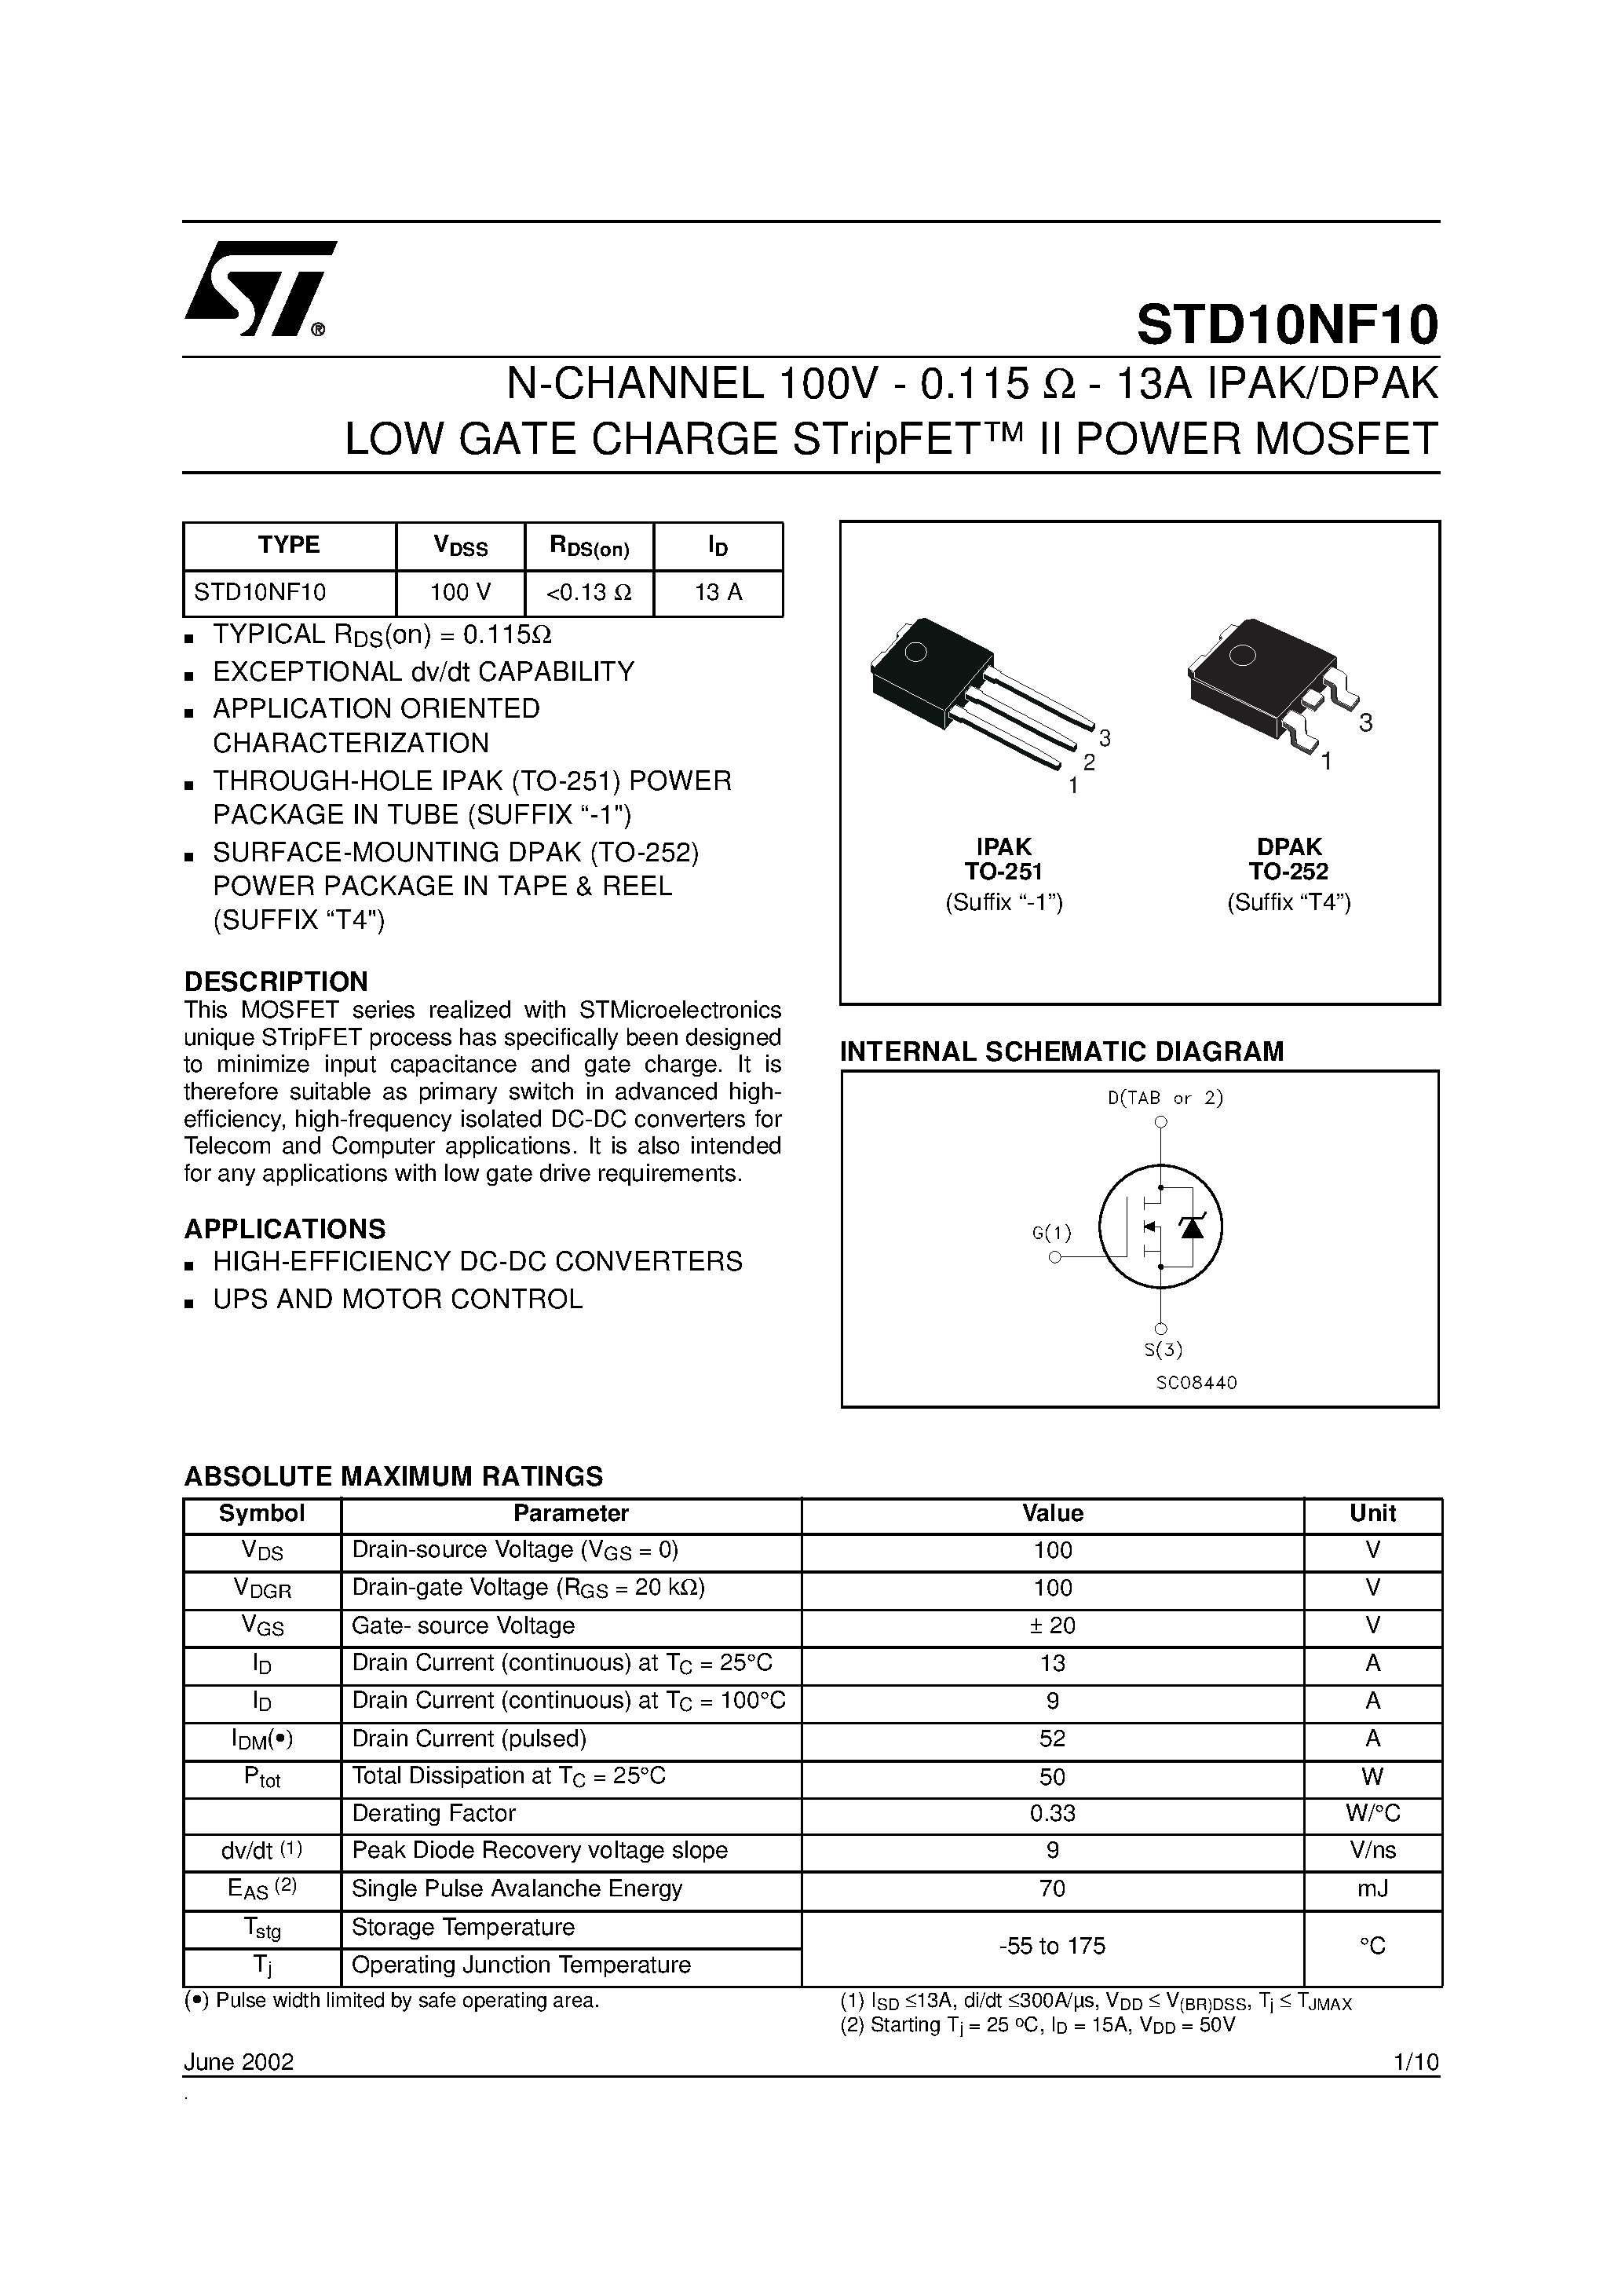 Даташит STD10NF10 - N-CHANNEL POWER MOSFET страница 1